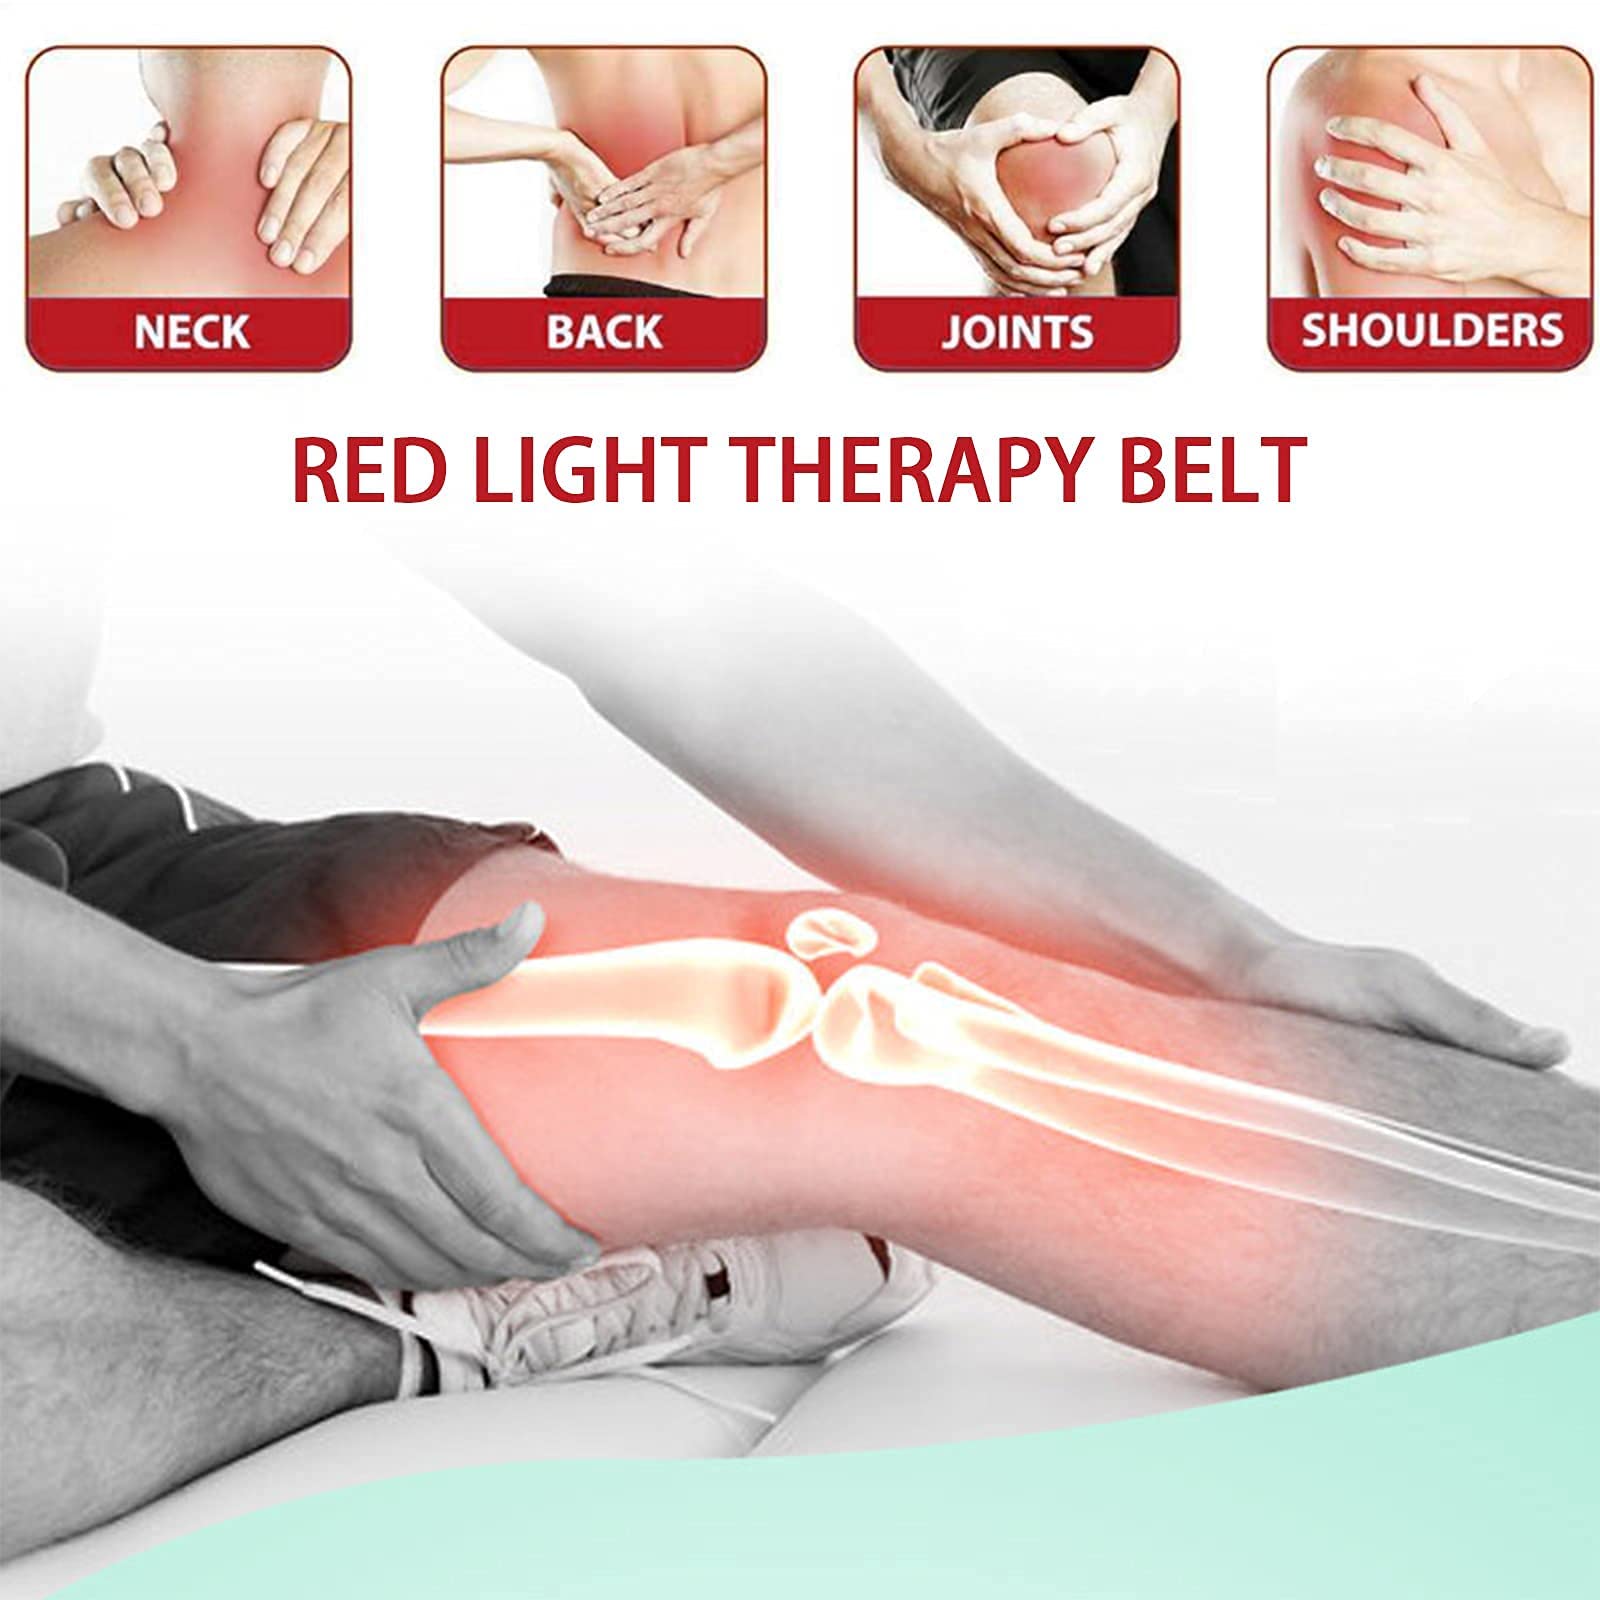 ADVASUN New LED Red Light Belt Devices for Body Flexible Wearable Deep Red 660nm and Near Infrared 850nm Pad with Timer for Back Shoulder Joints Muscle,Waist with 2 Wavelengths(Blue-105pcs)